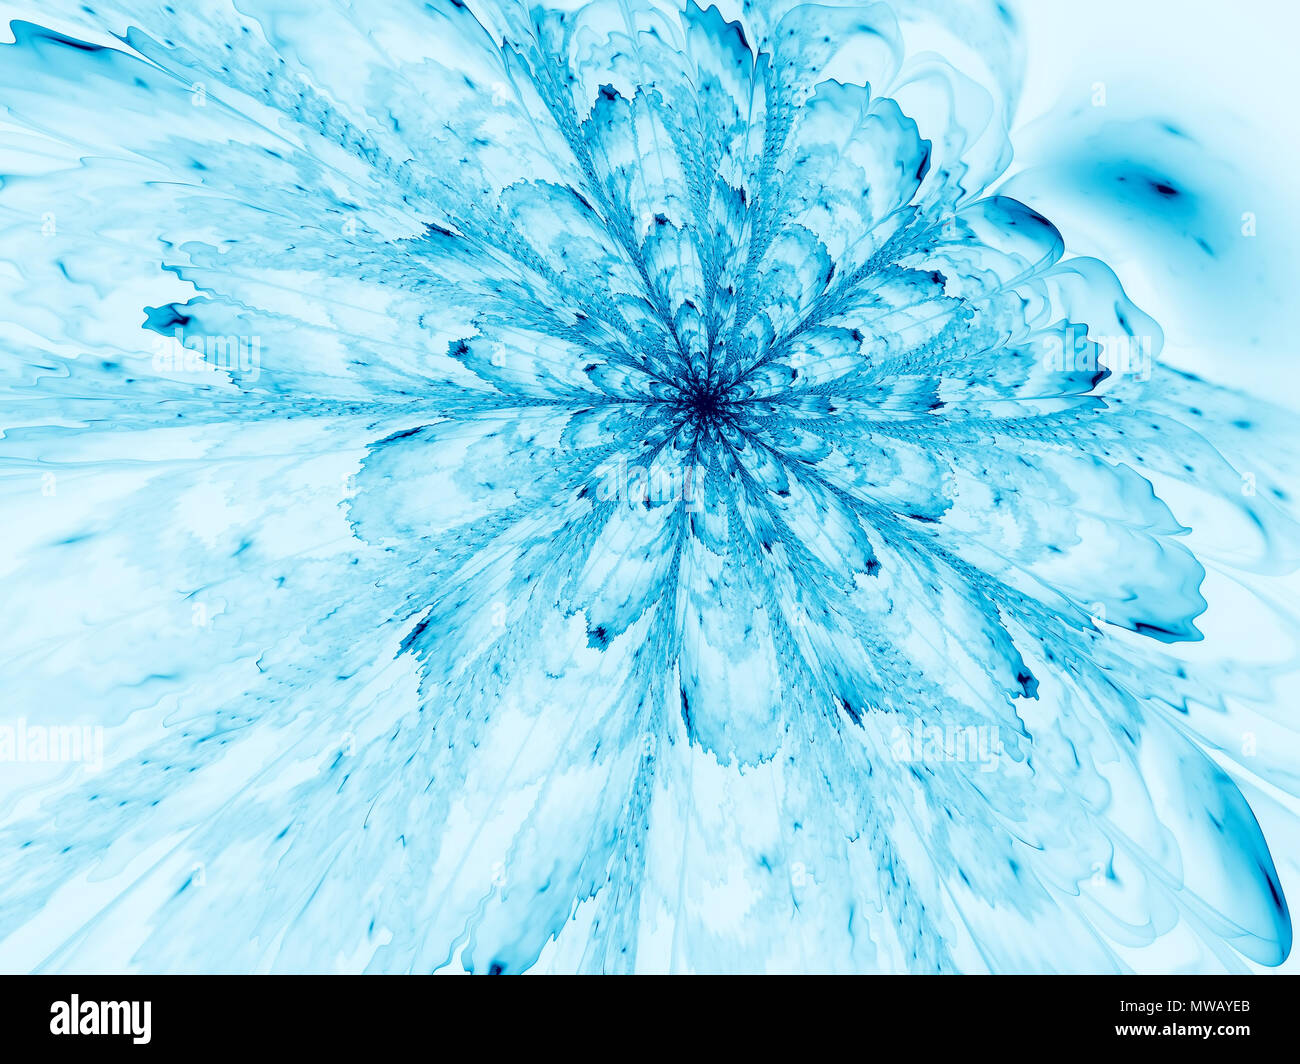 Unusual flower - abstract digitally generated image Stock Photo